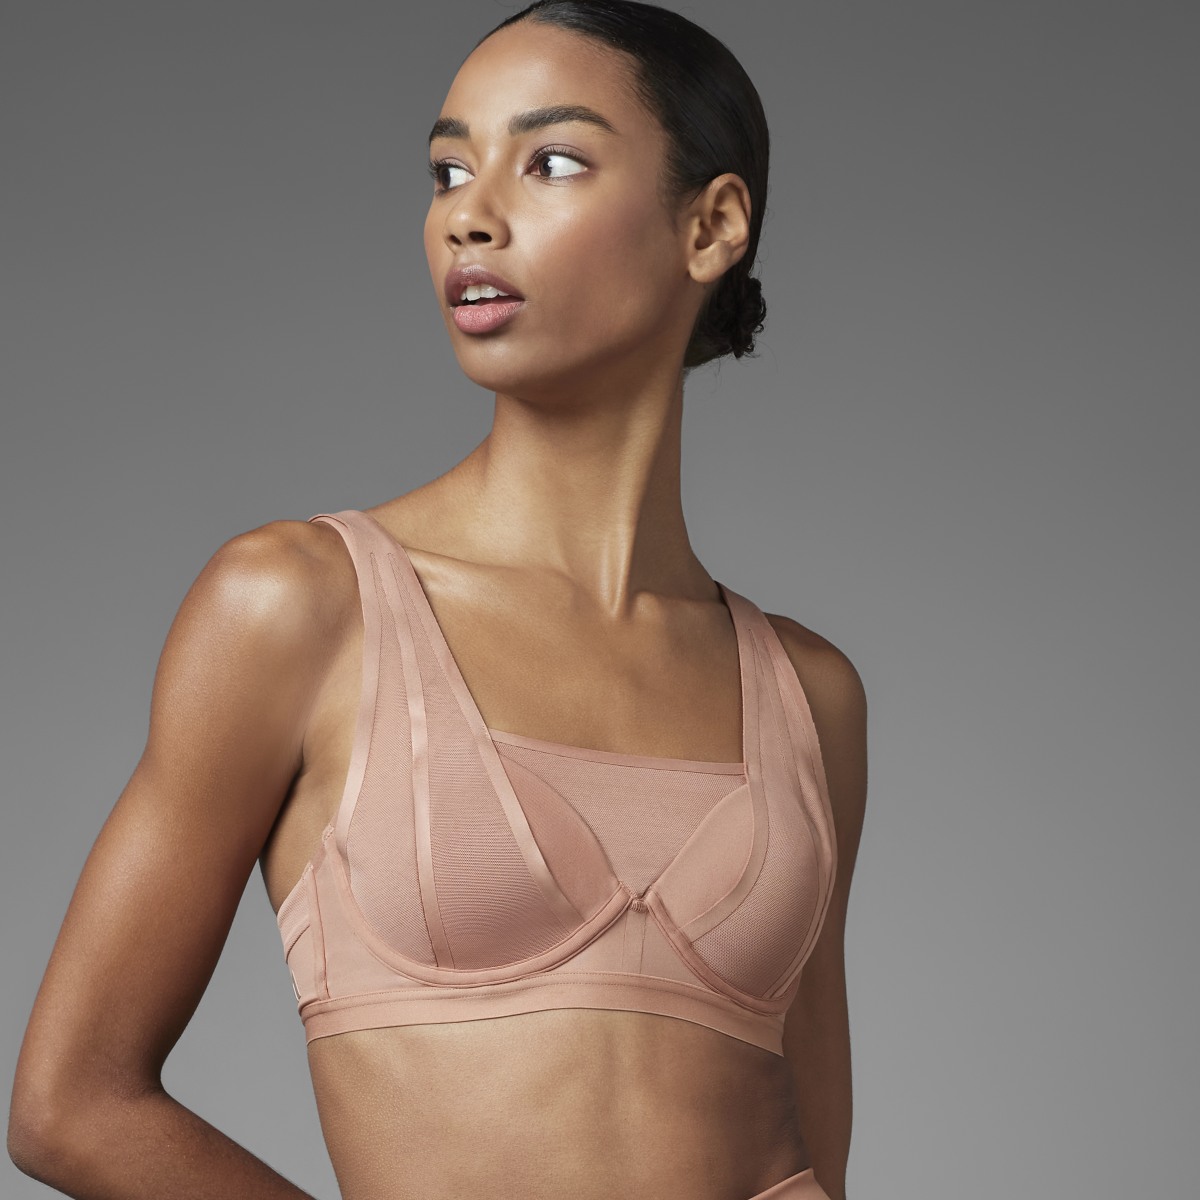 Adidas TLRD Impact Luxe High Support Bra. 5